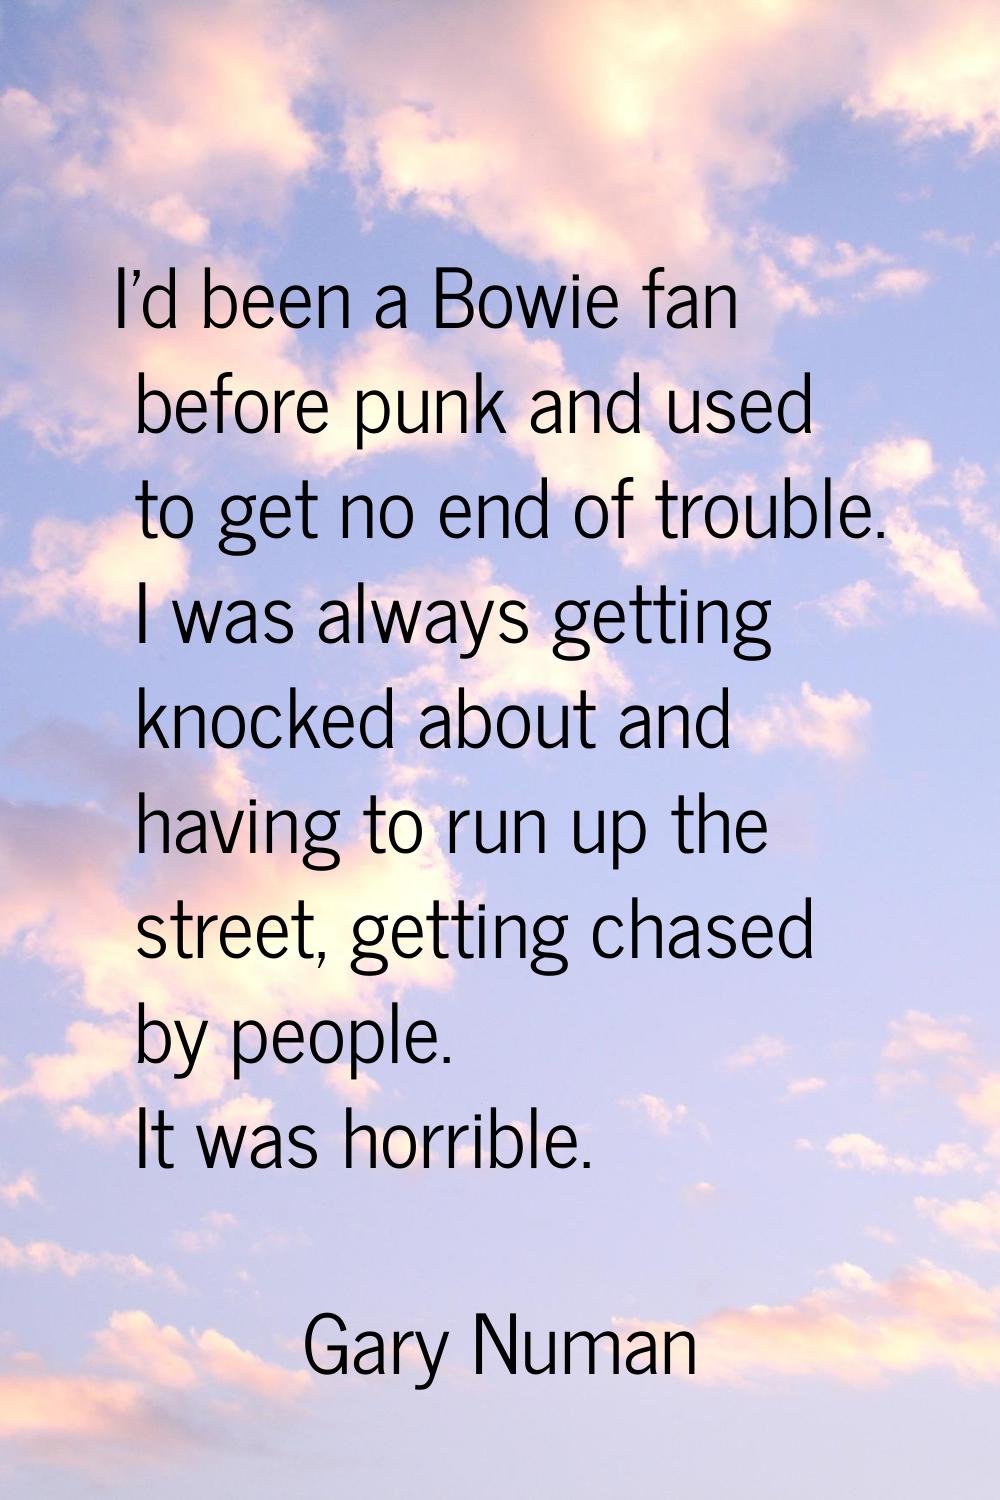 I'd been a Bowie fan before punk and used to get no end of trouble. I was always getting knocked ab